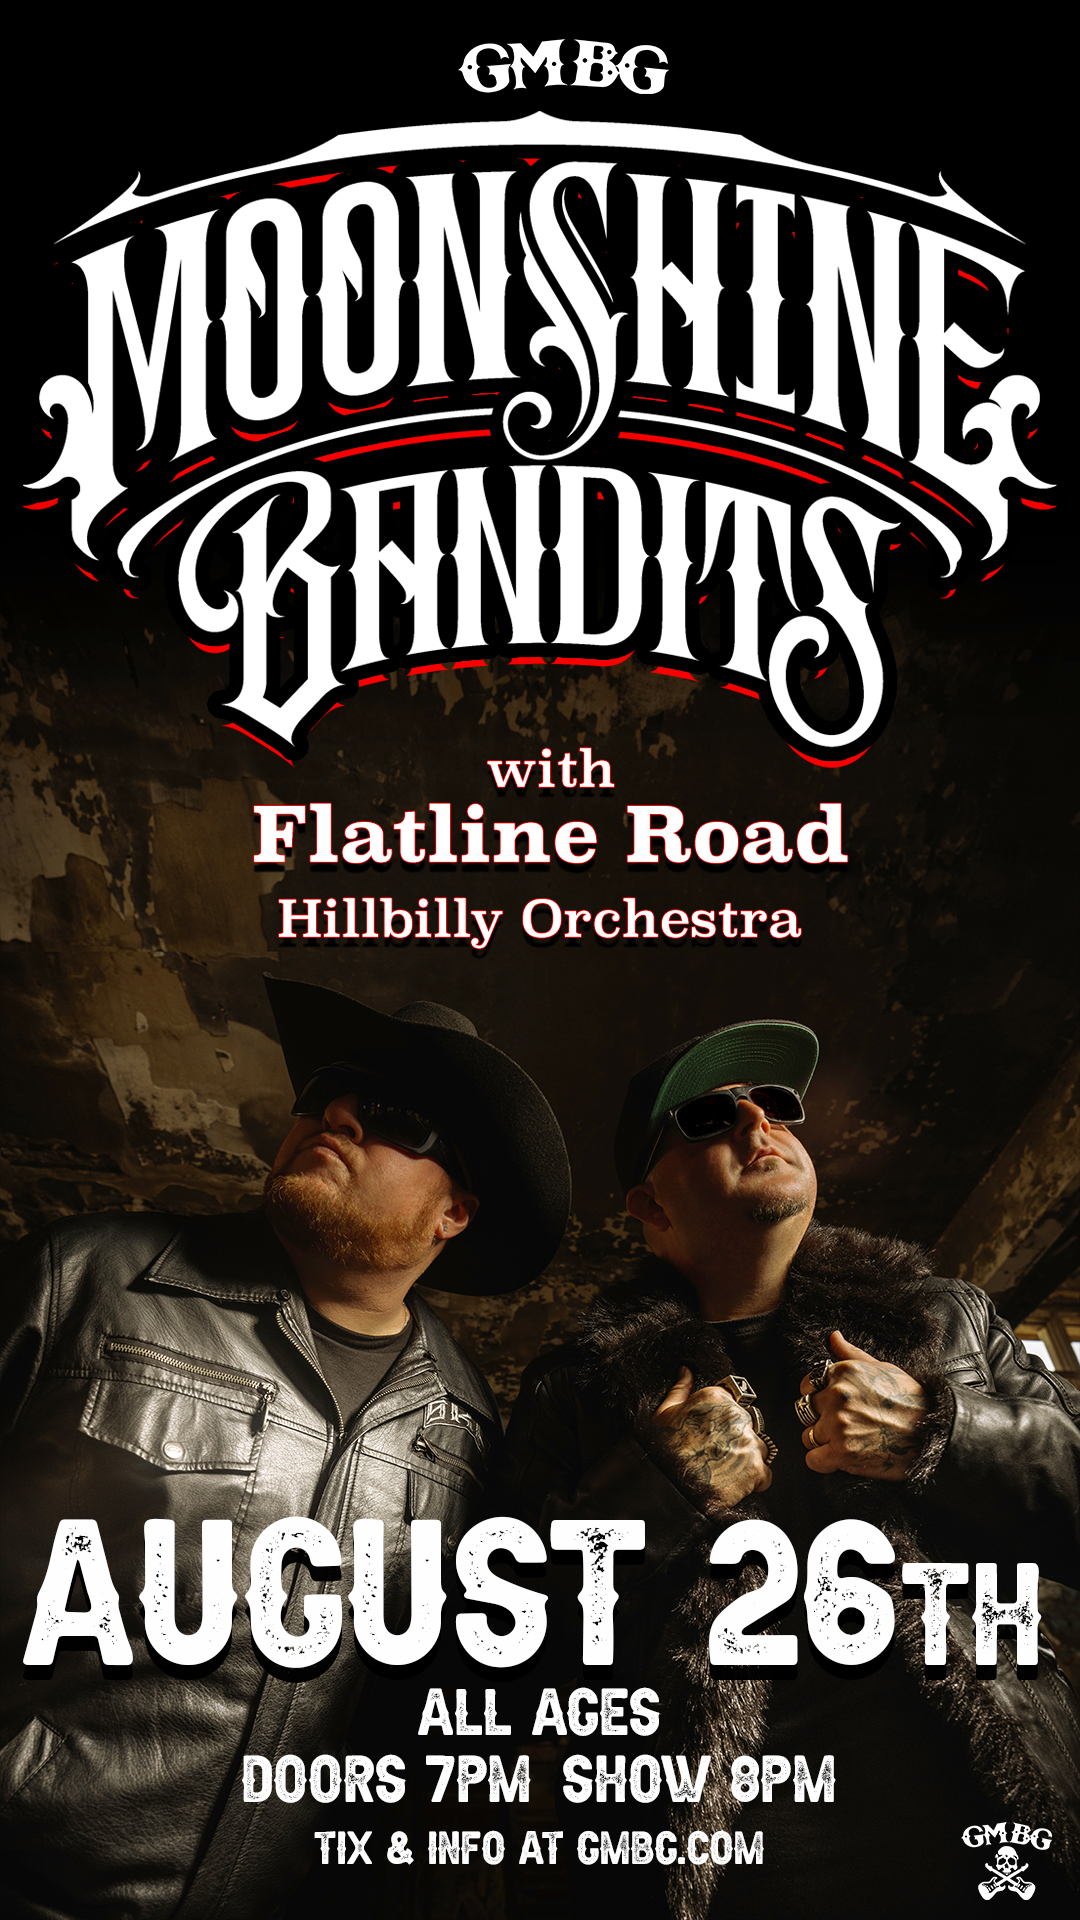 Buy Tickets to Moonshine Bandits in Dallas on Aug 26, 2021